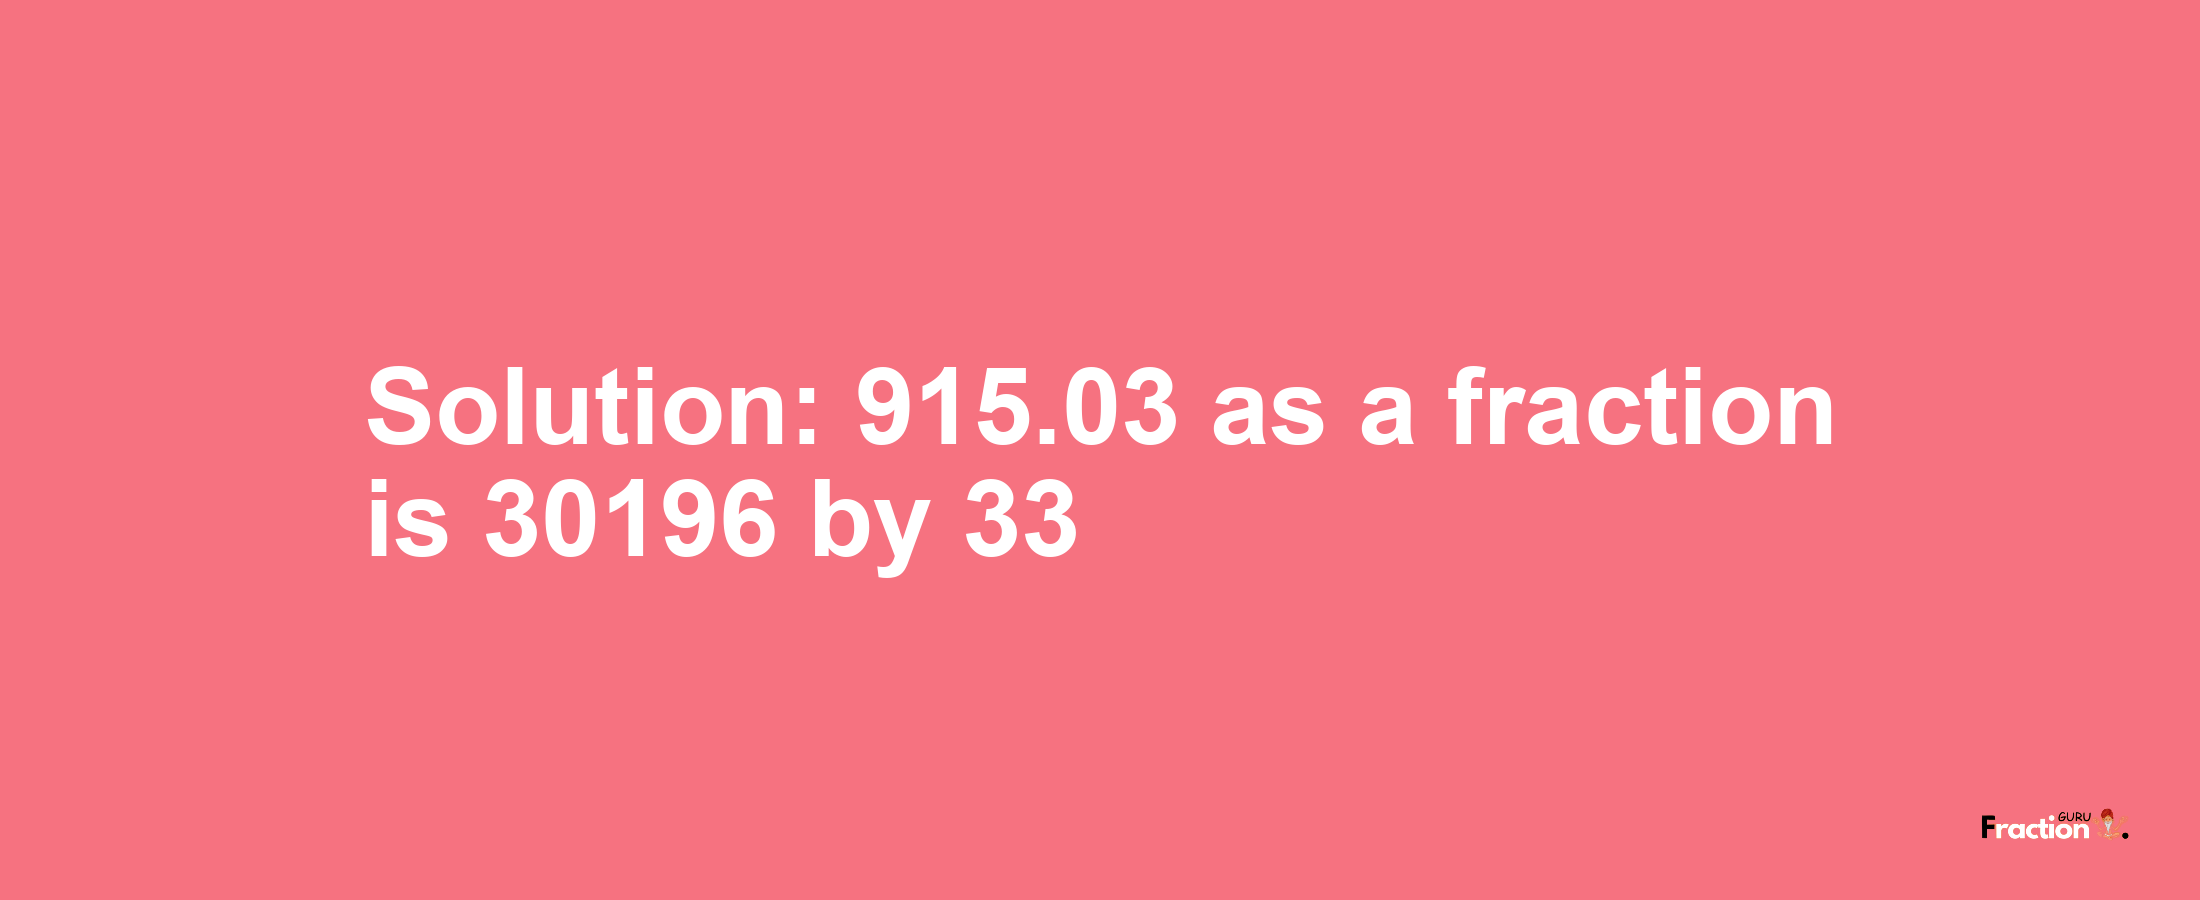 Solution:915.03 as a fraction is 30196/33